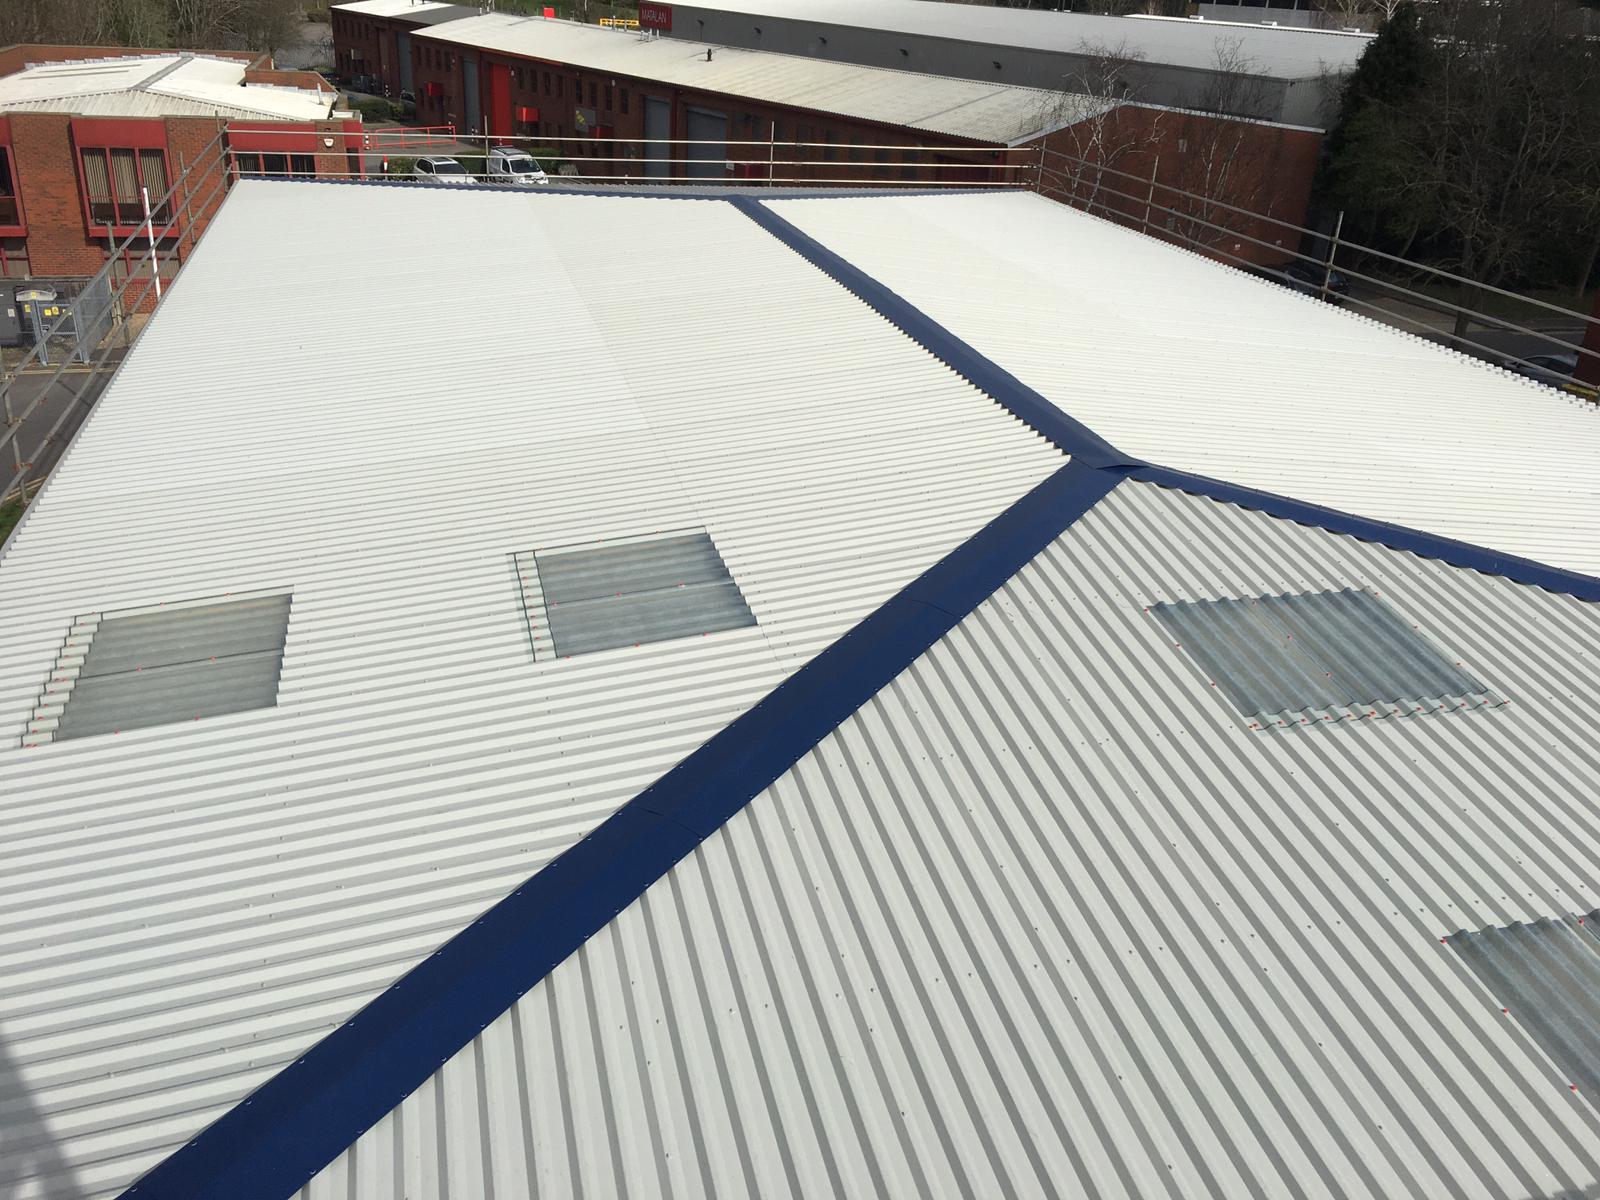 Over-Roofing to an Office Warehouse Roof in Camberley Surrey